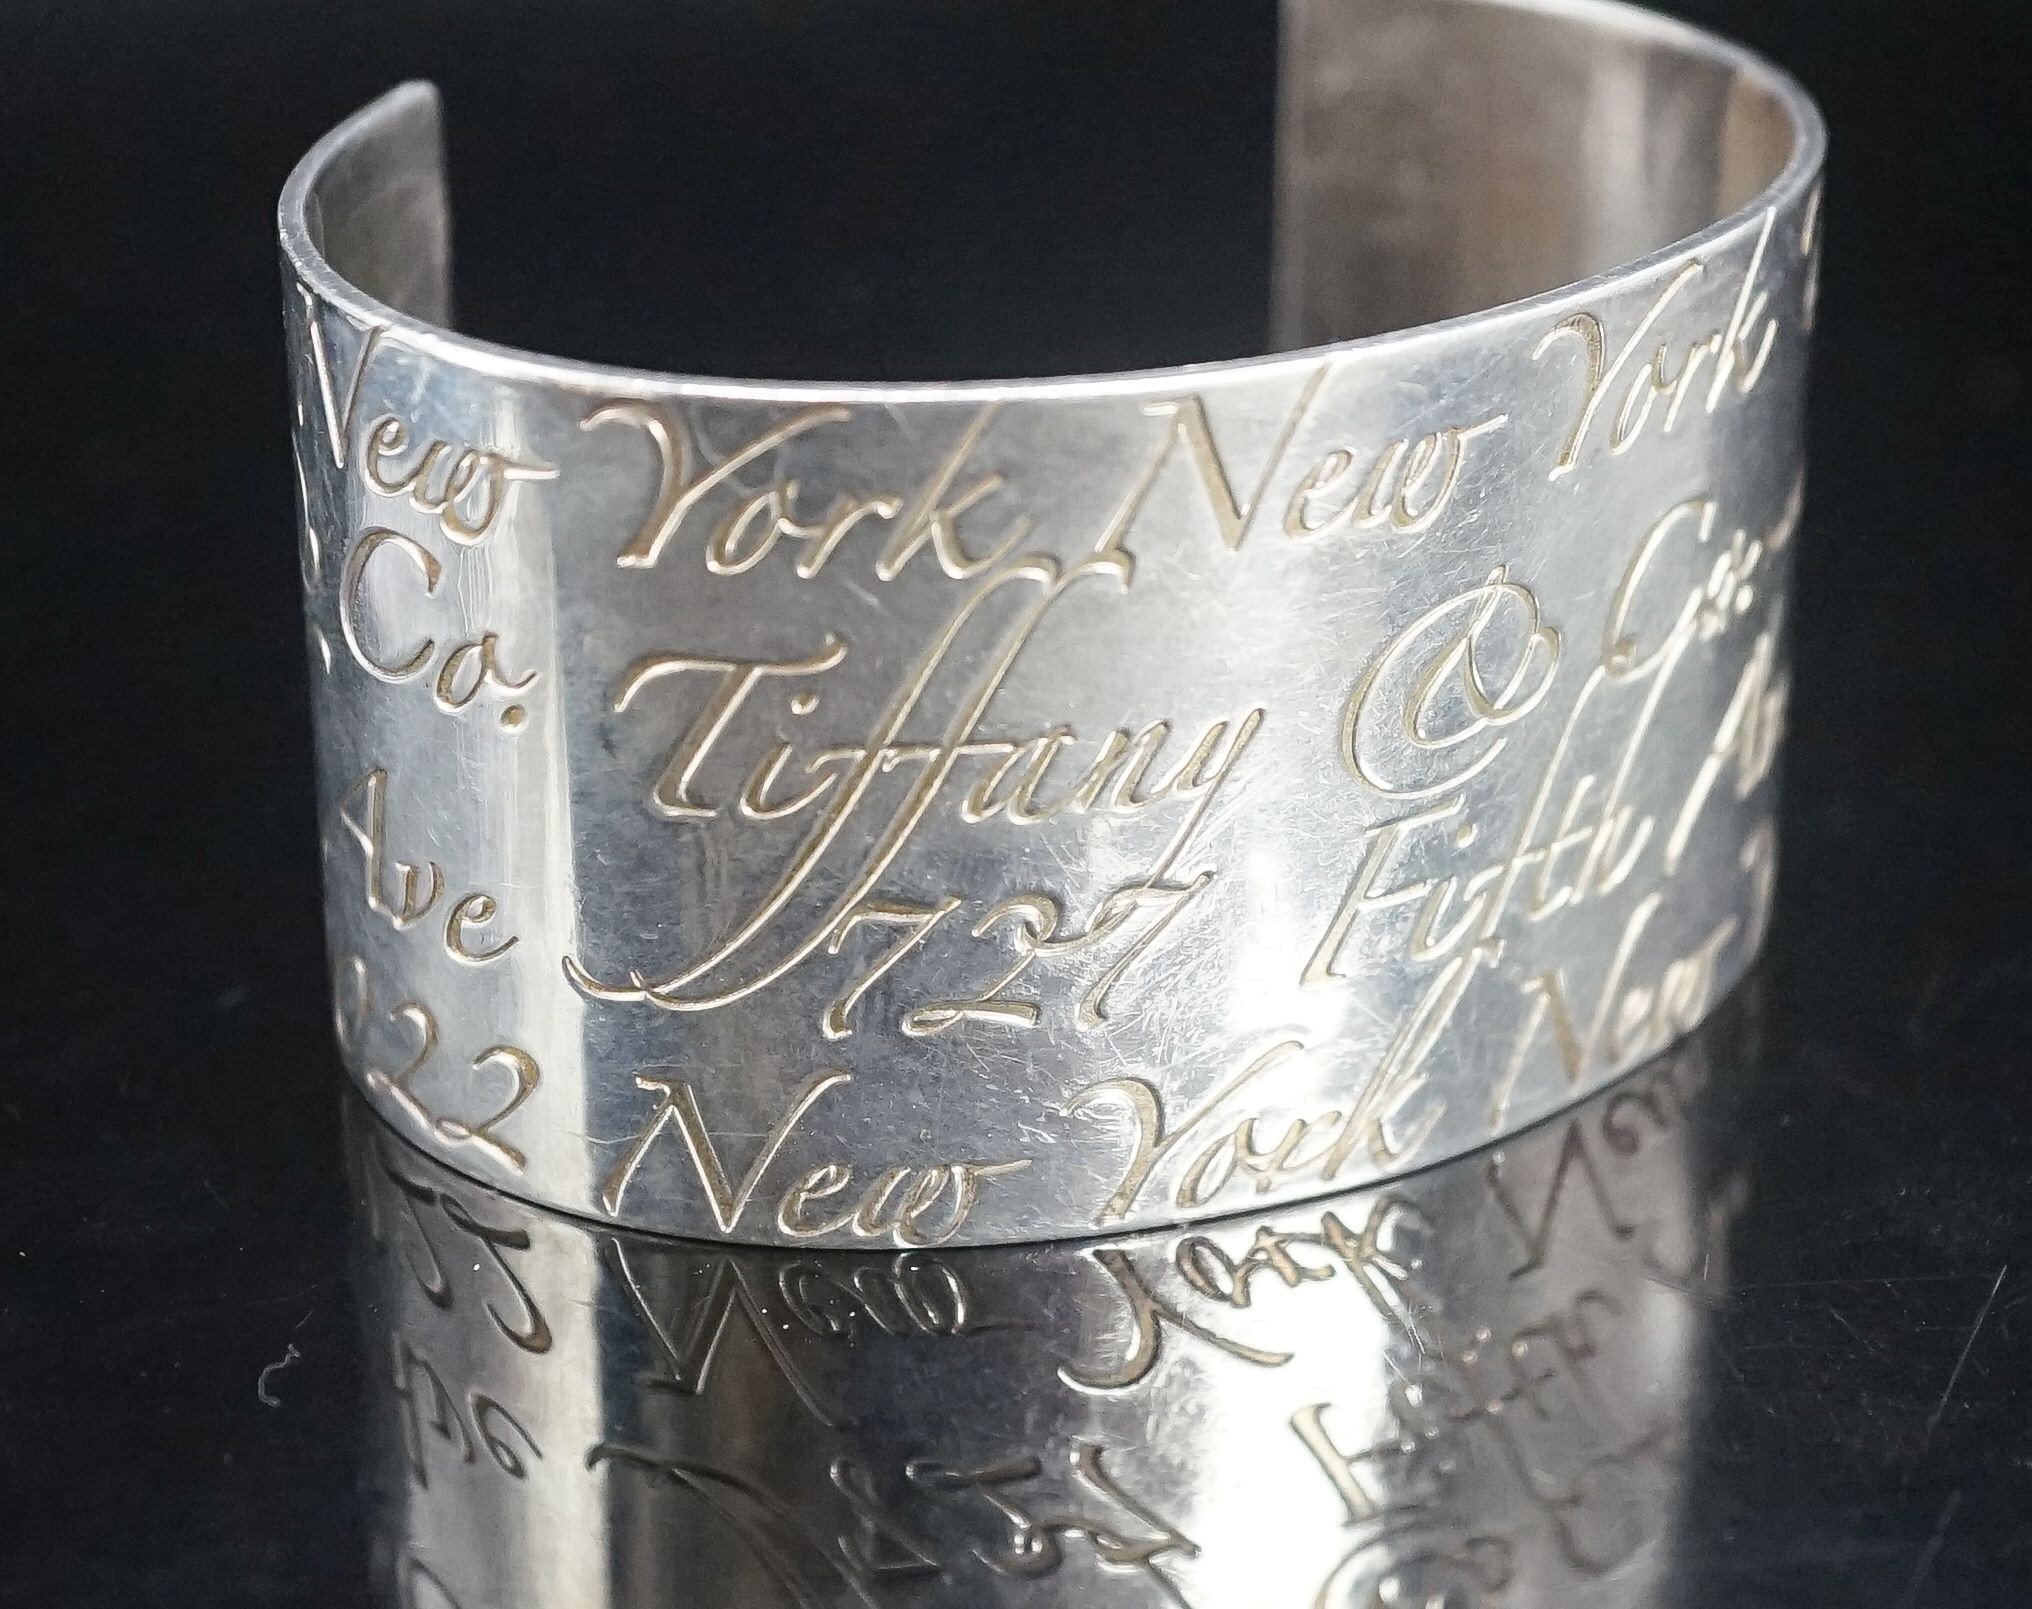 A Tiffany & Co 925 open bangle with engraved script, interior diameter approx. 69mm.